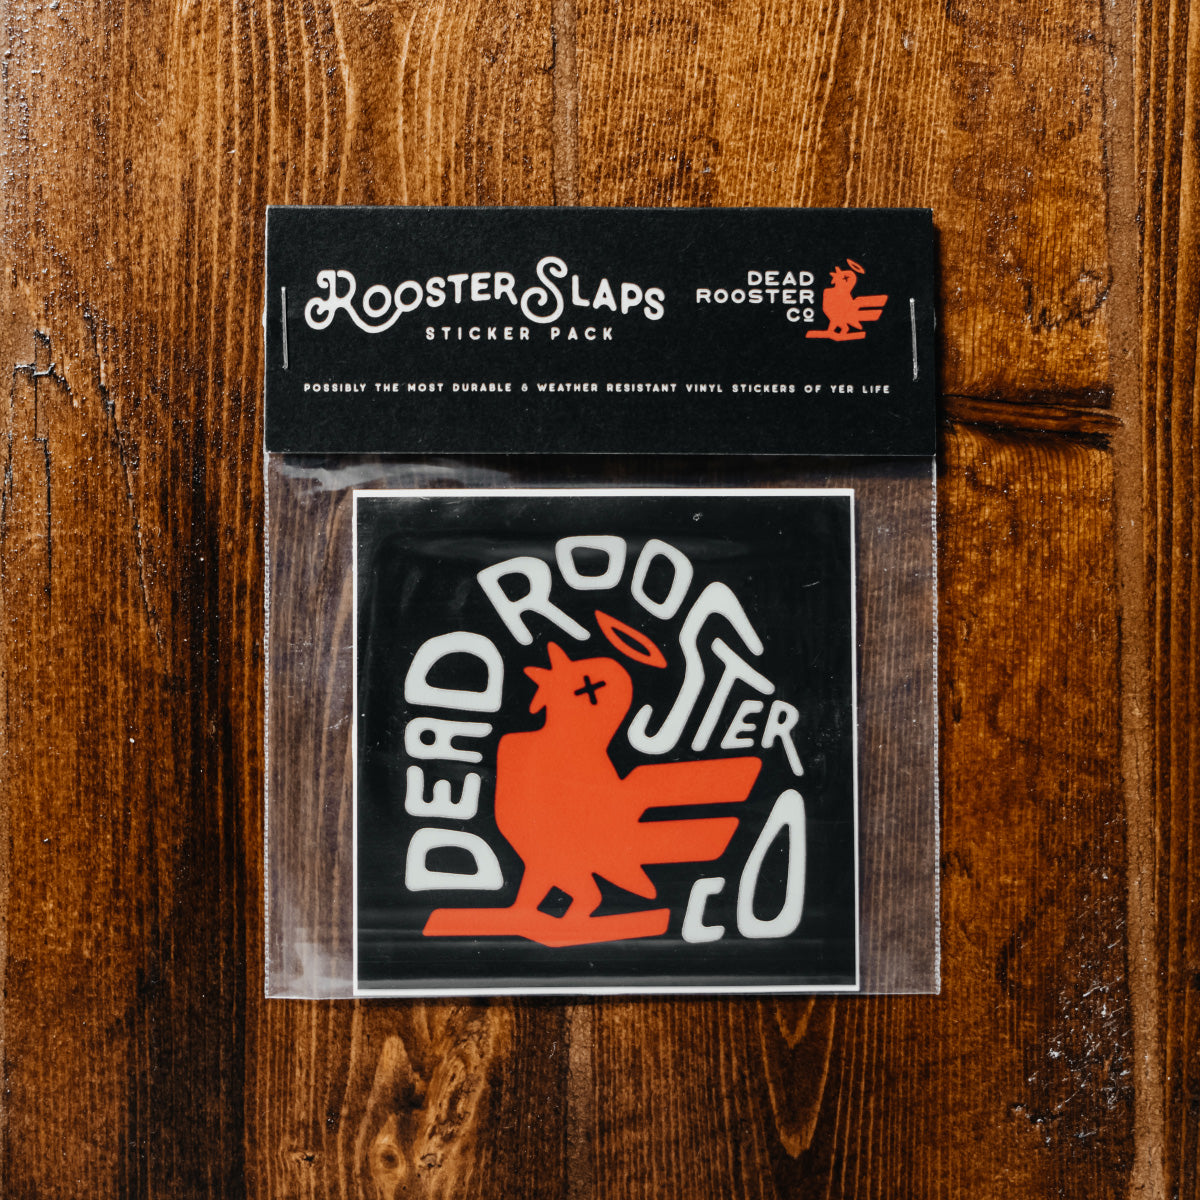 Rooster Slaps <br><sub>Sticker Pack</sub>